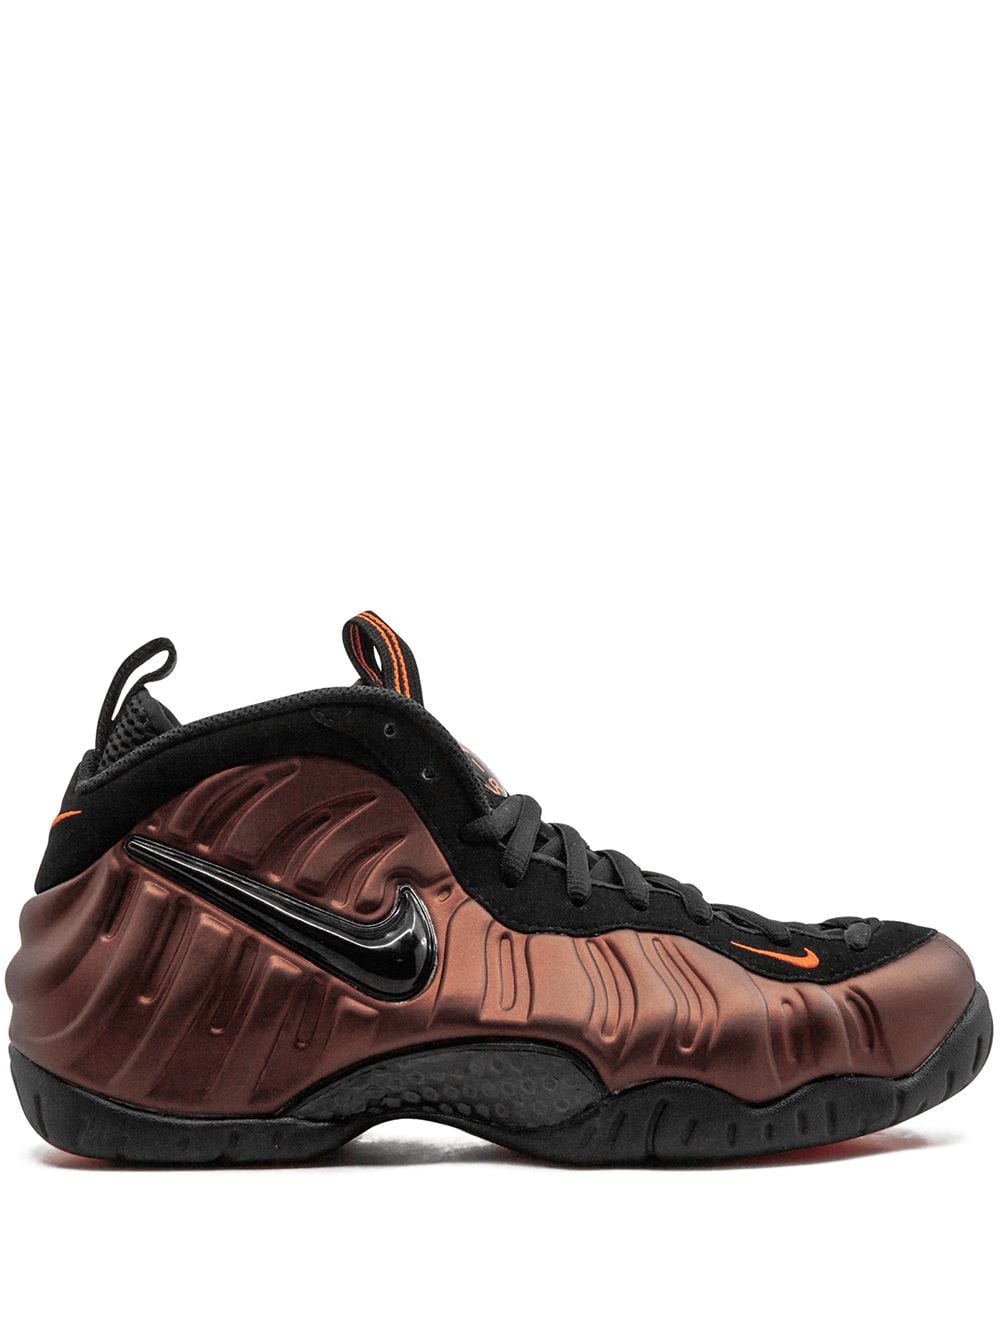 black and brown foamposites